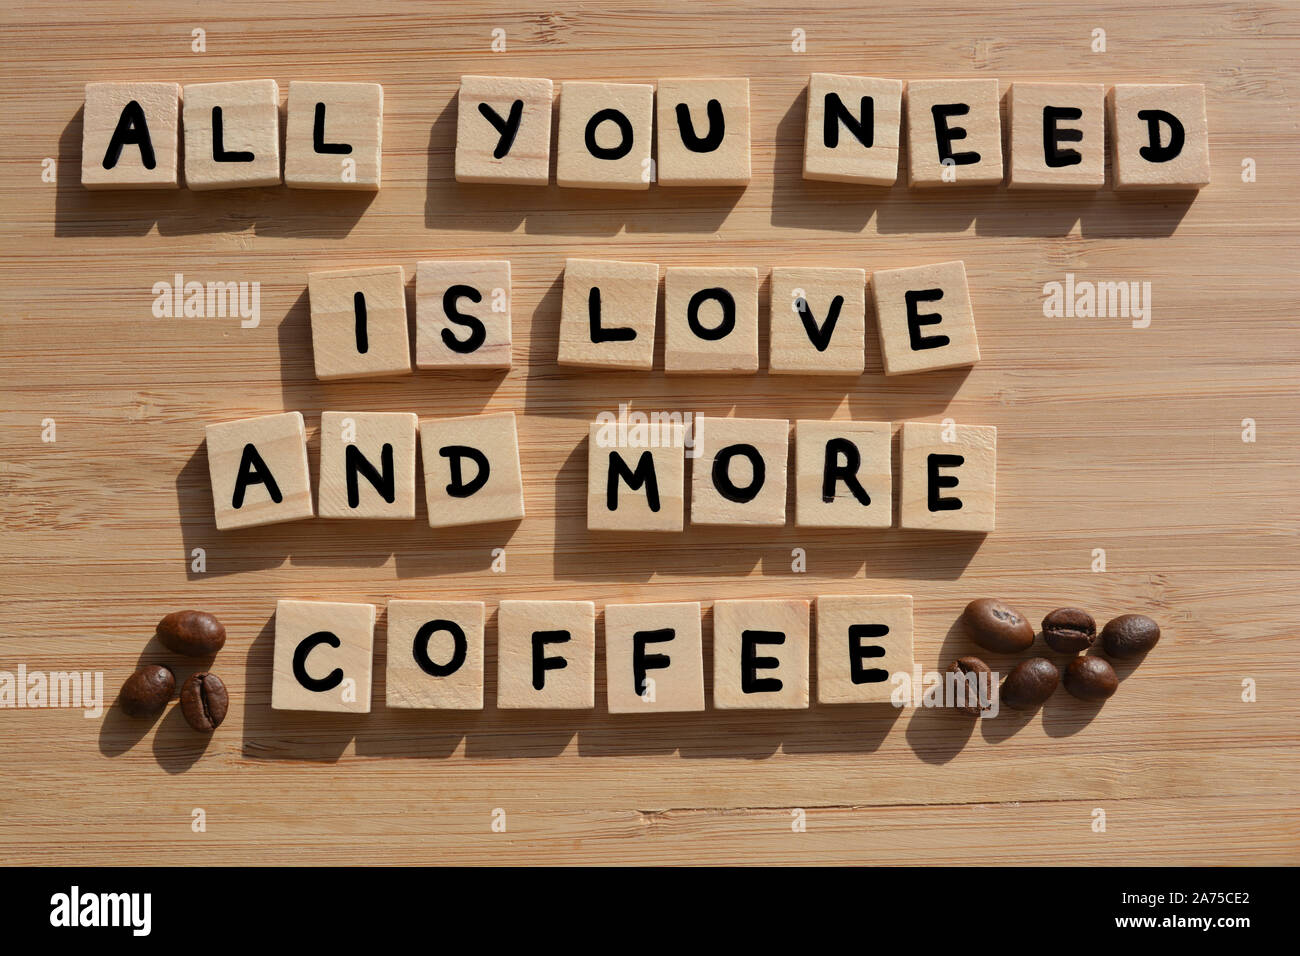 All You Need Is Love And More Coffee-. Words in 3d wooden alphabet letters with coffee beans on a bamboo wood background Stock Photo